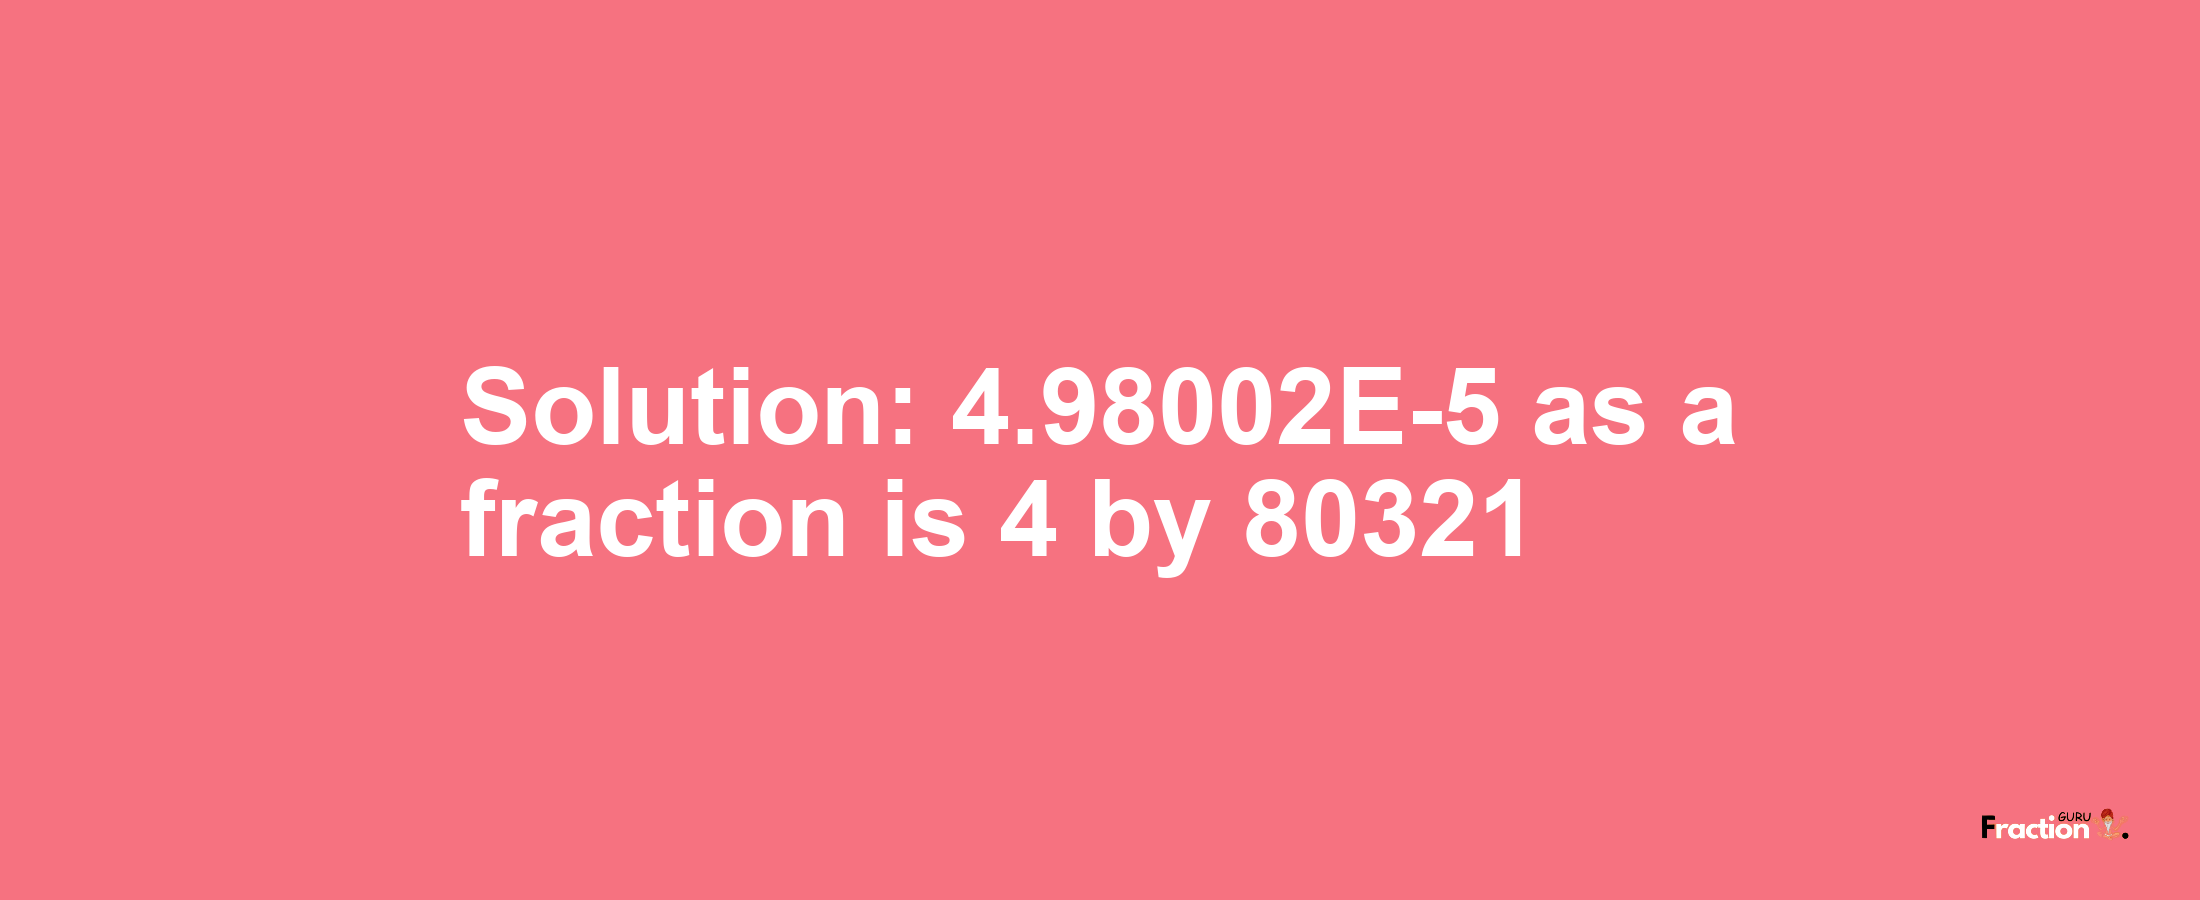 Solution:4.98002E-5 as a fraction is 4/80321